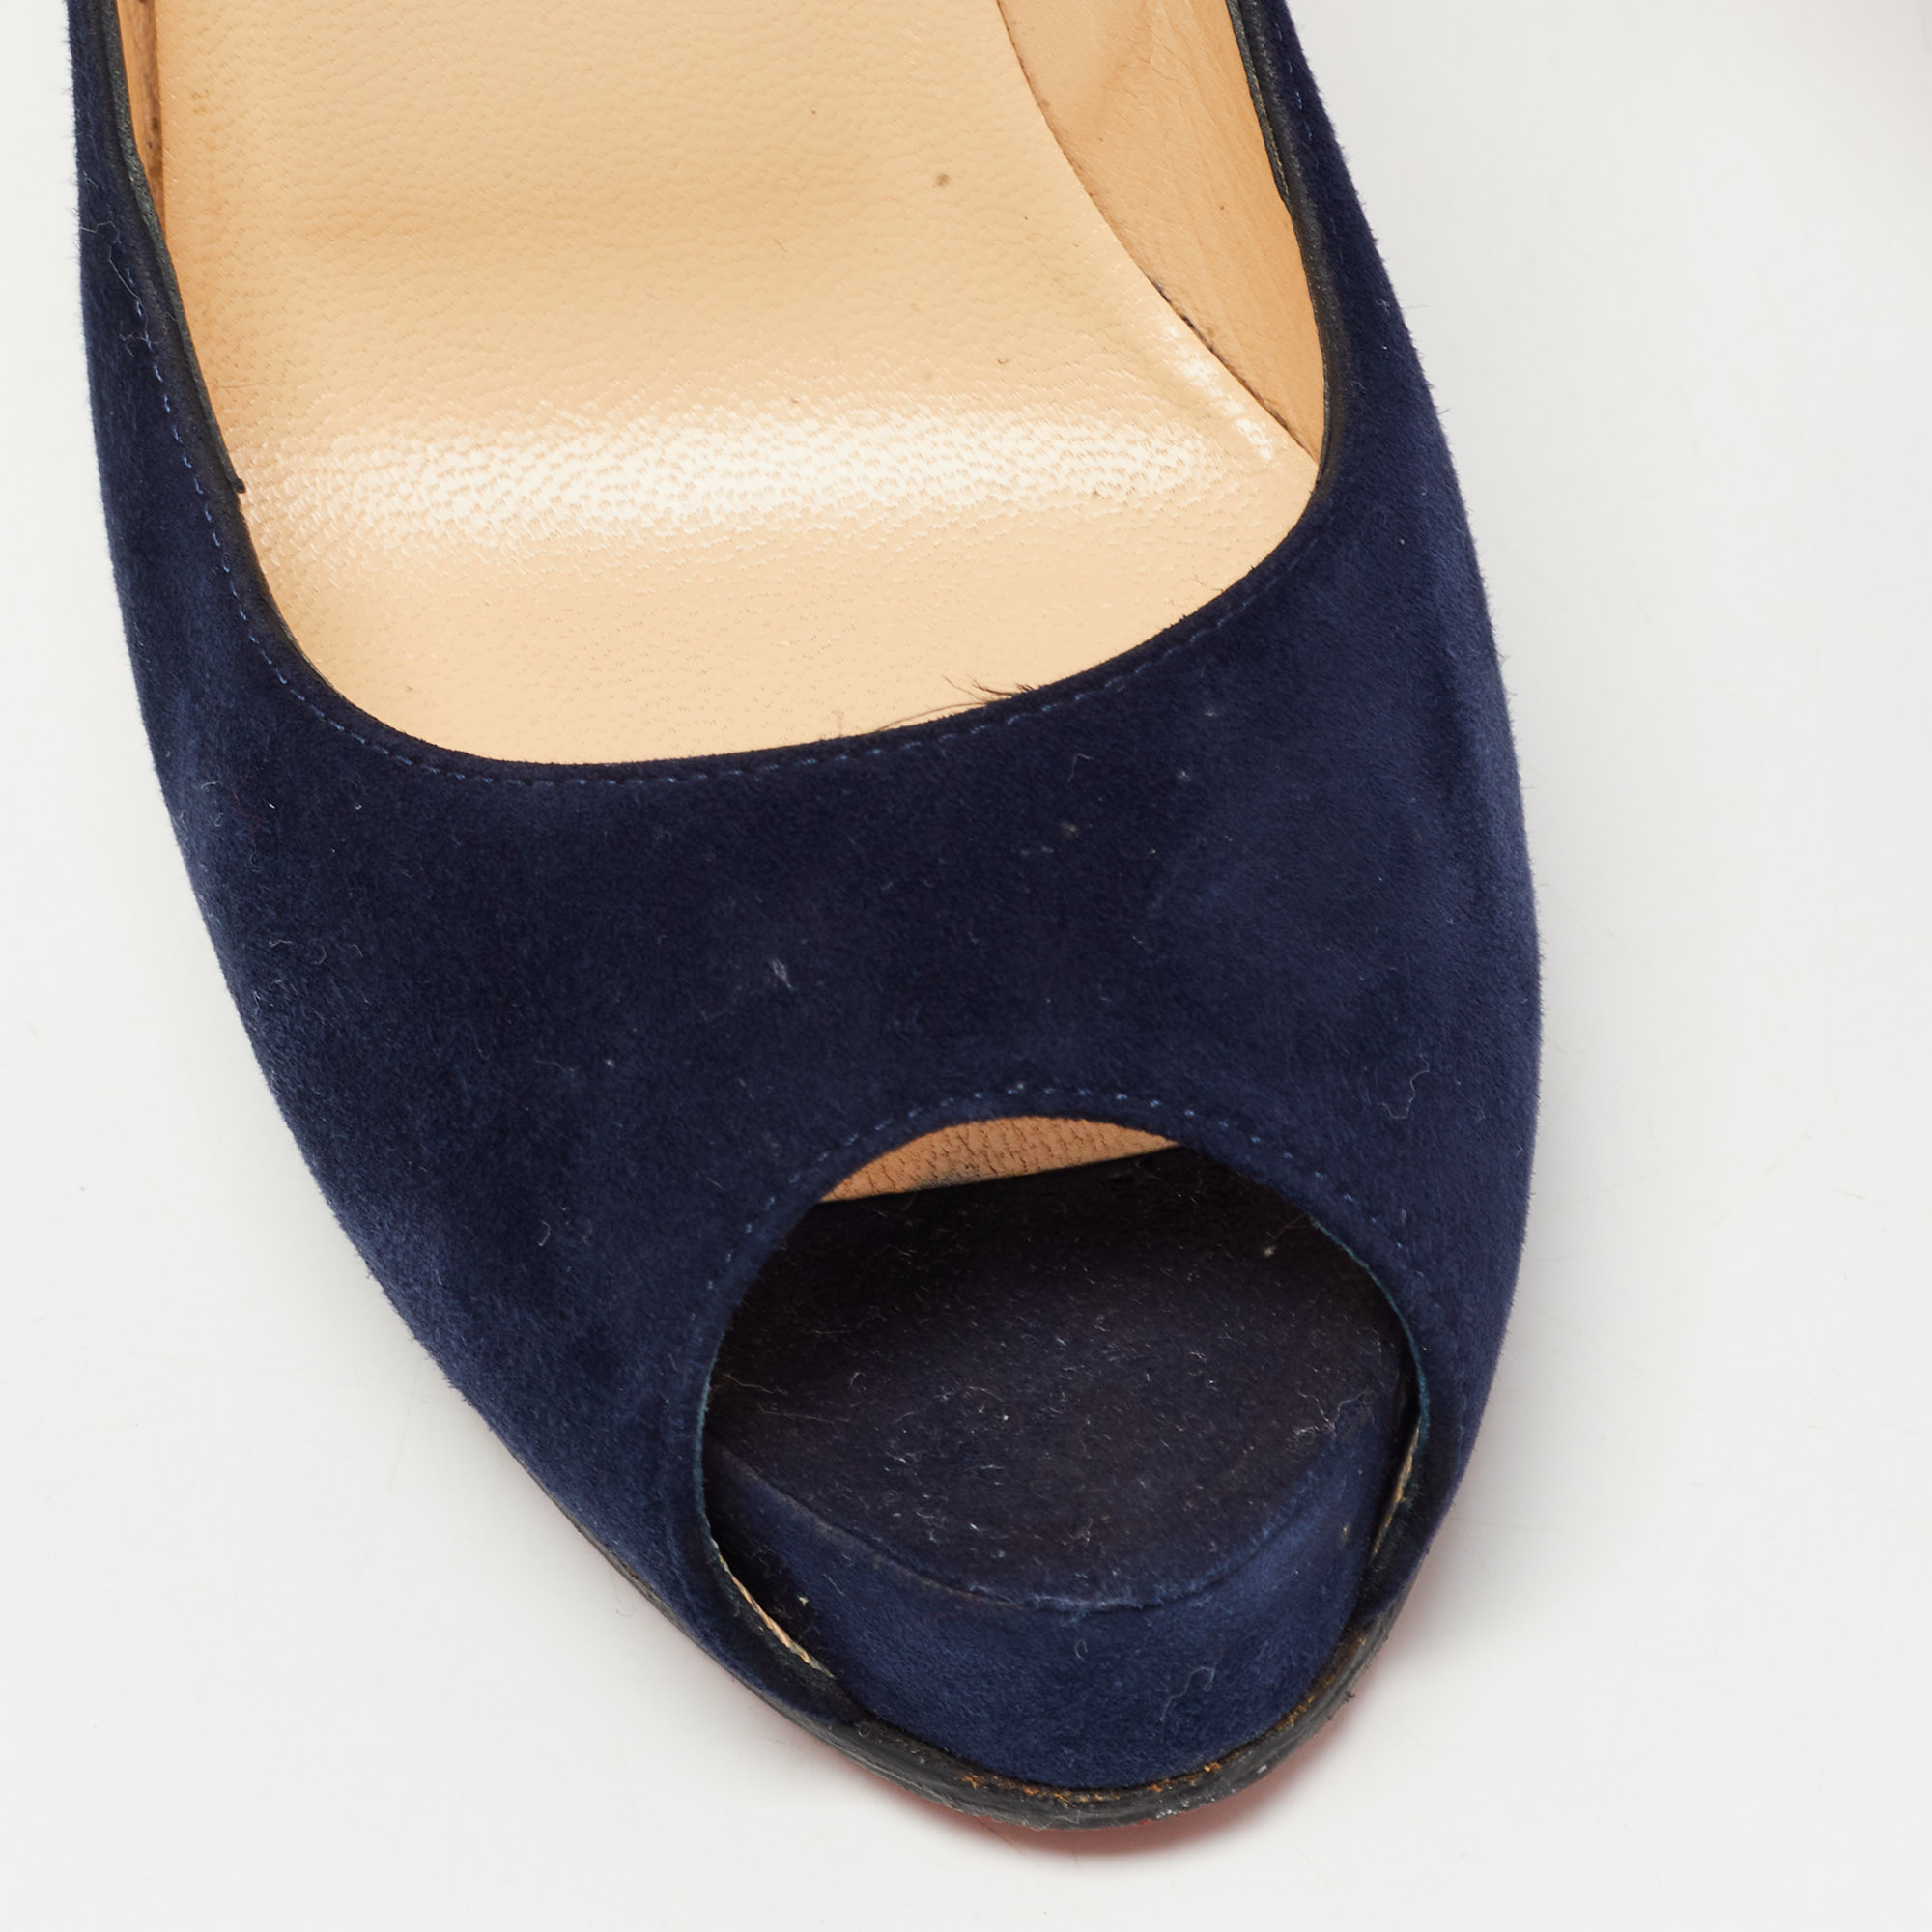 Christian Louboutin Navy Blue Suede Very Prive Pumps Size 37.5